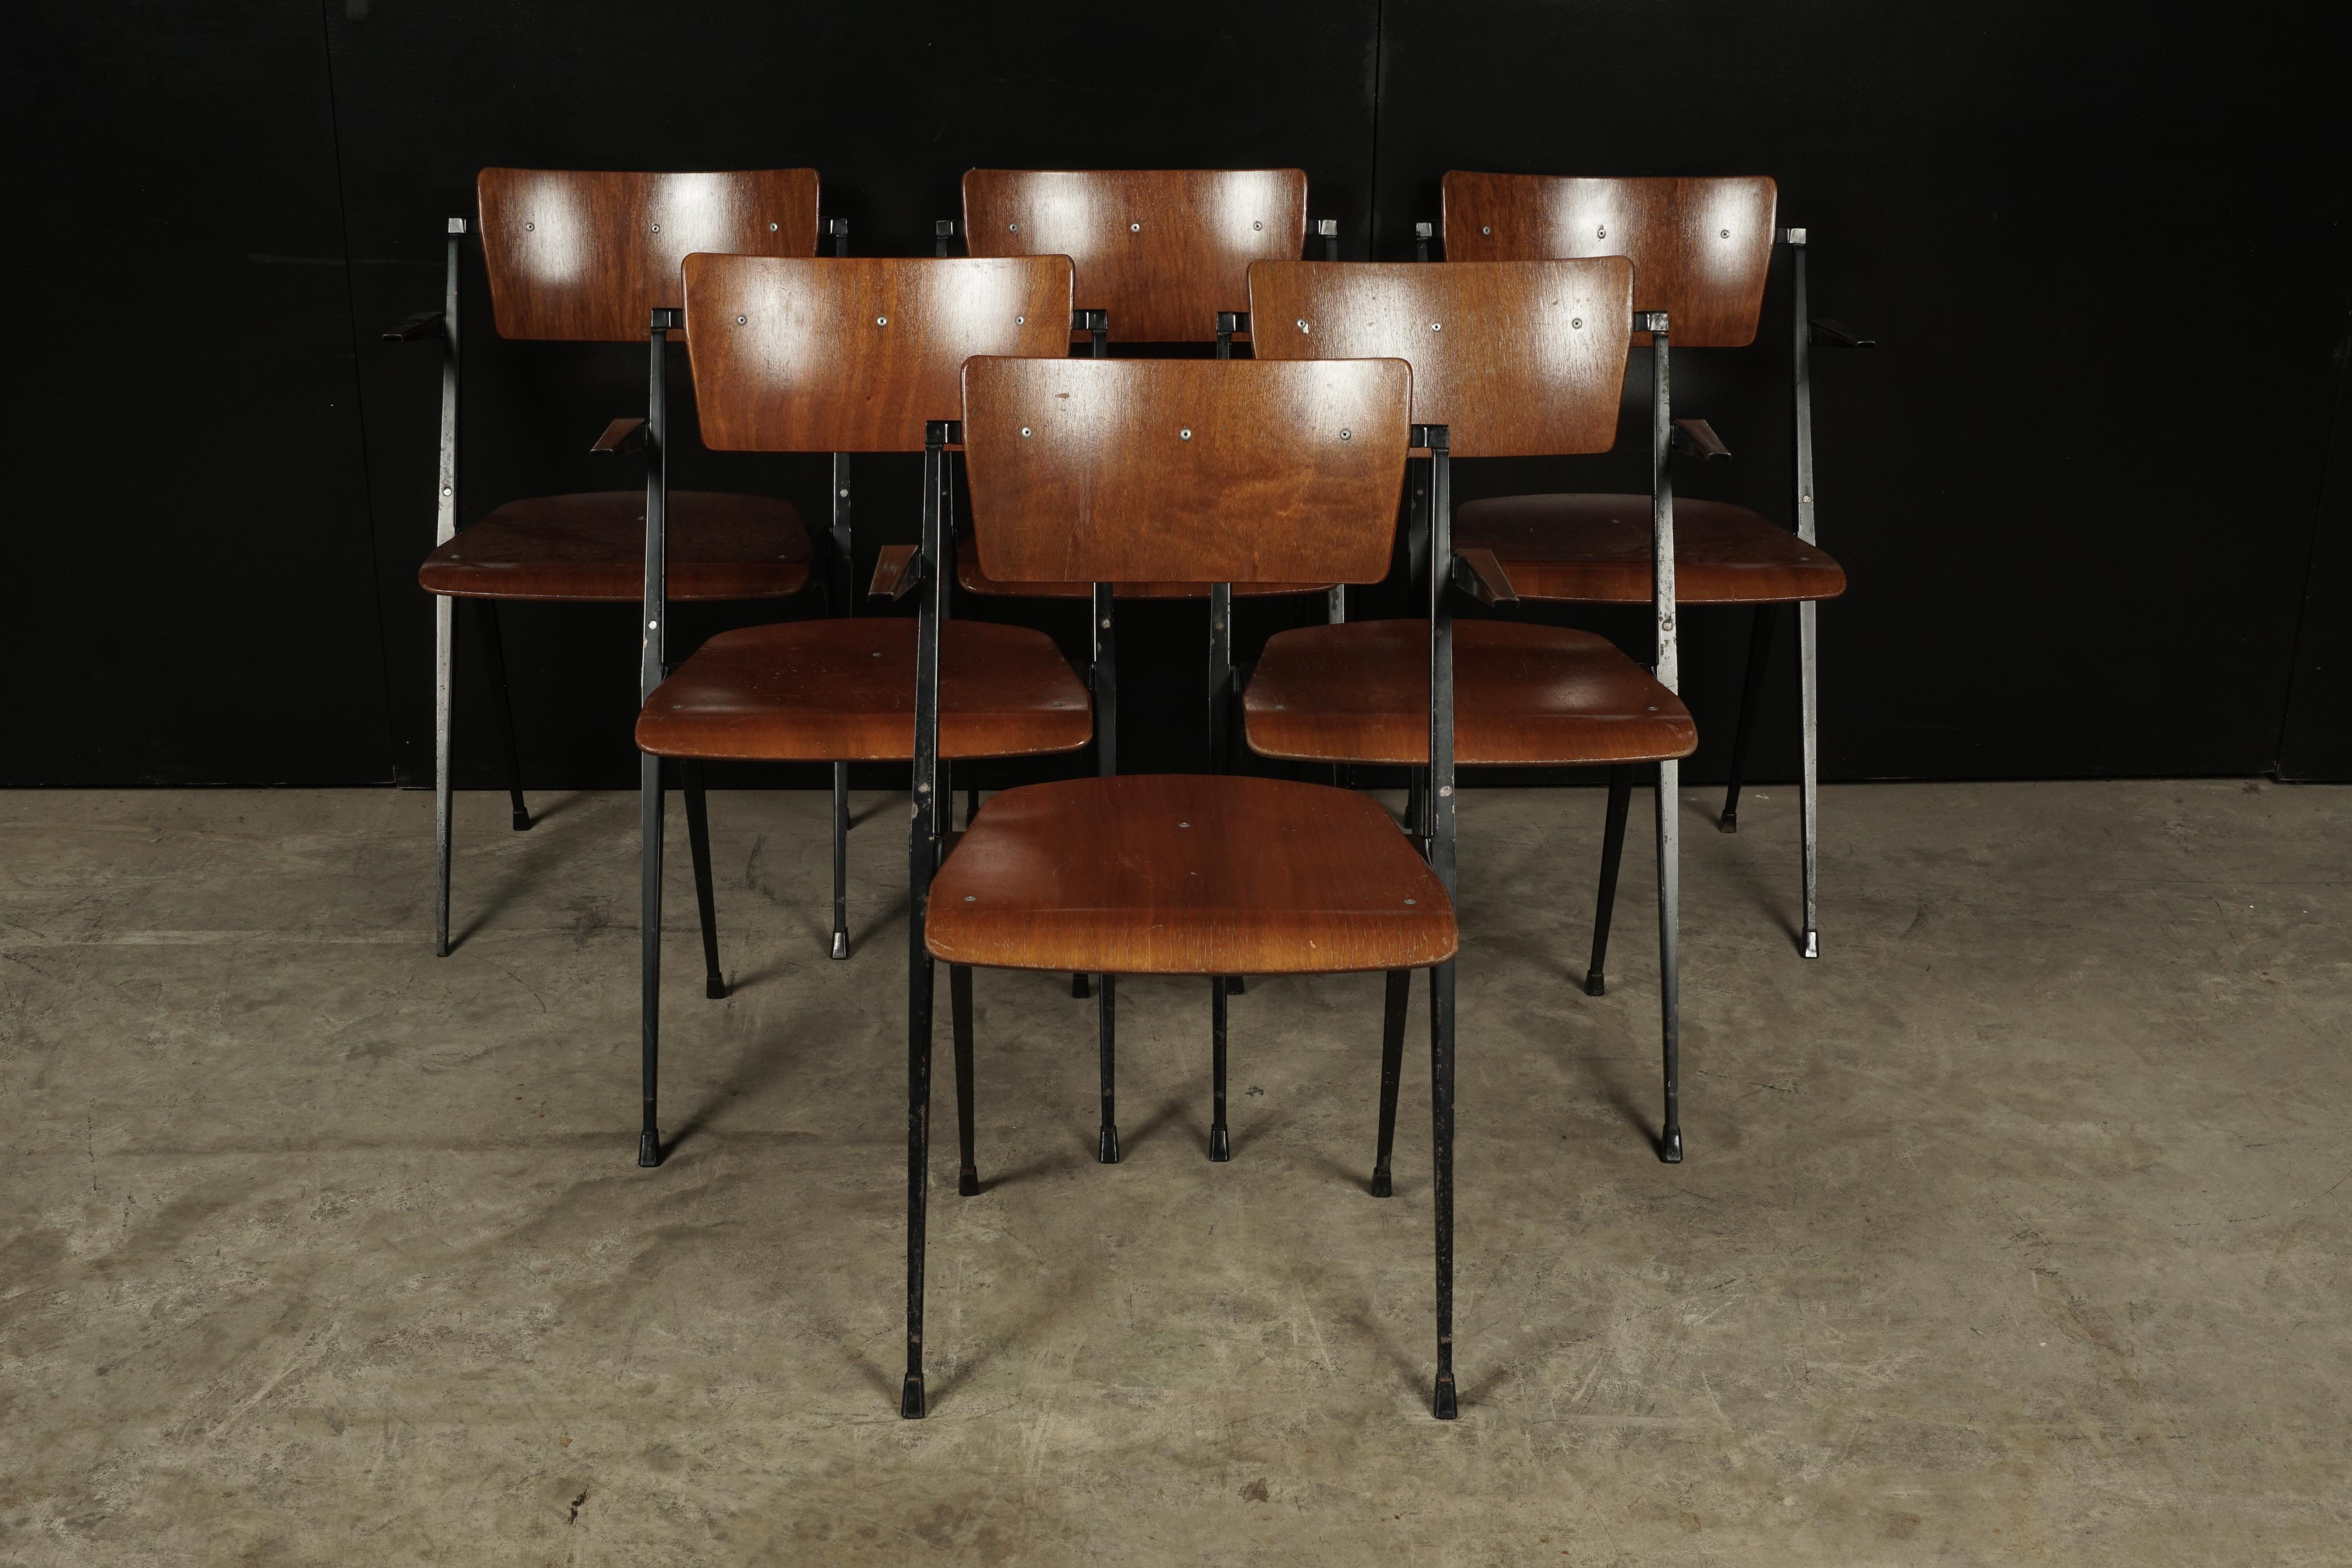 Rare set of six stacking chairs designed by Wm. Rietveld, circa 1960. This rare chair won a famous ‘Signe d’Or’ design award in 1960. Very original condition with visible Scapes to the metal and enamel. Minimal chipping on some of the wood surface